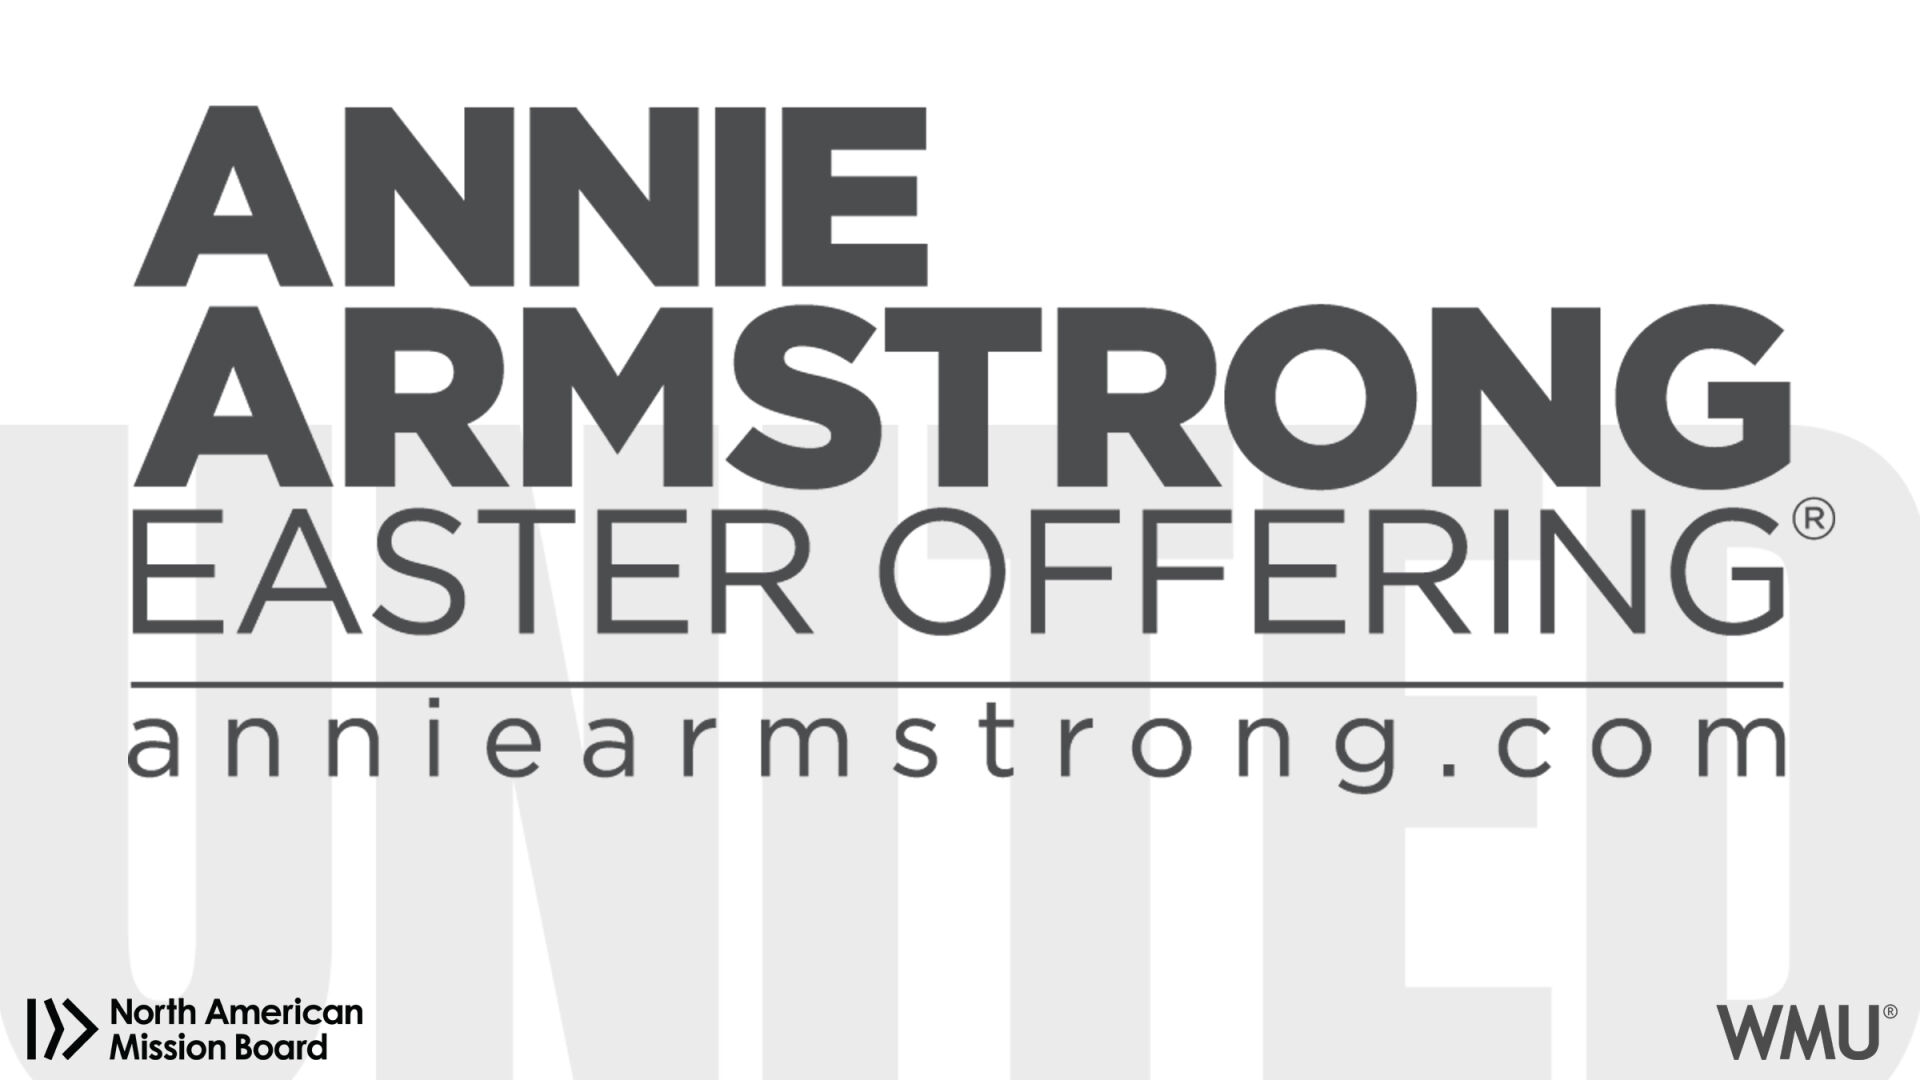 What is the Annie Armstrong Easter Offering?